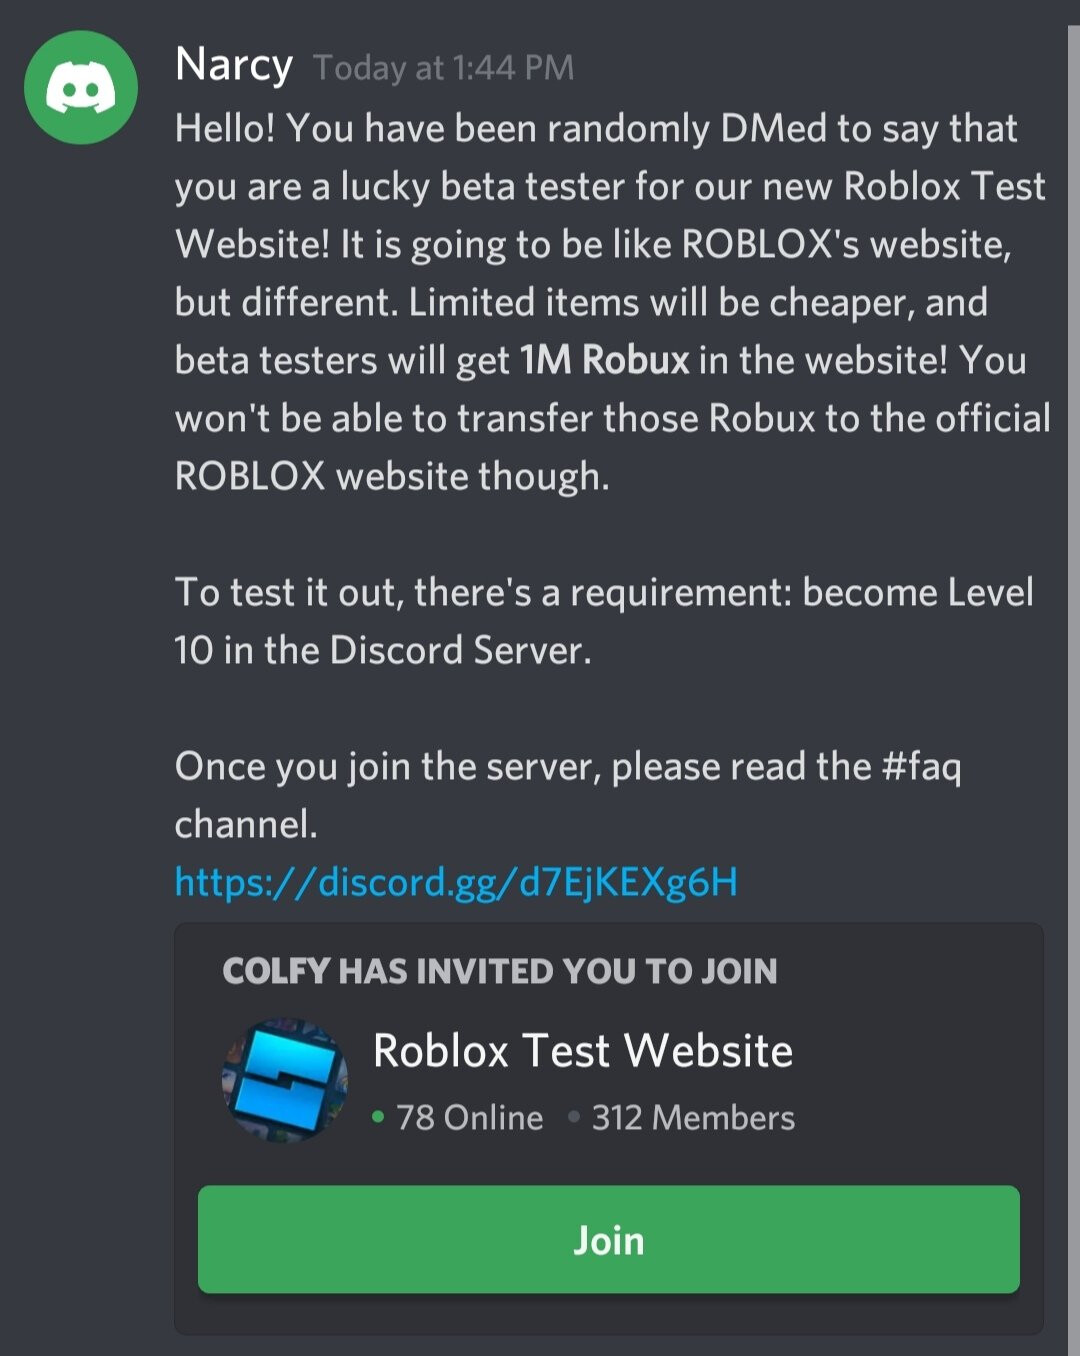 You are a lucky beta tester for our new Roblox Test Website! Scam  (Includes Discord server to Flood) - Phishing - Scammer Info